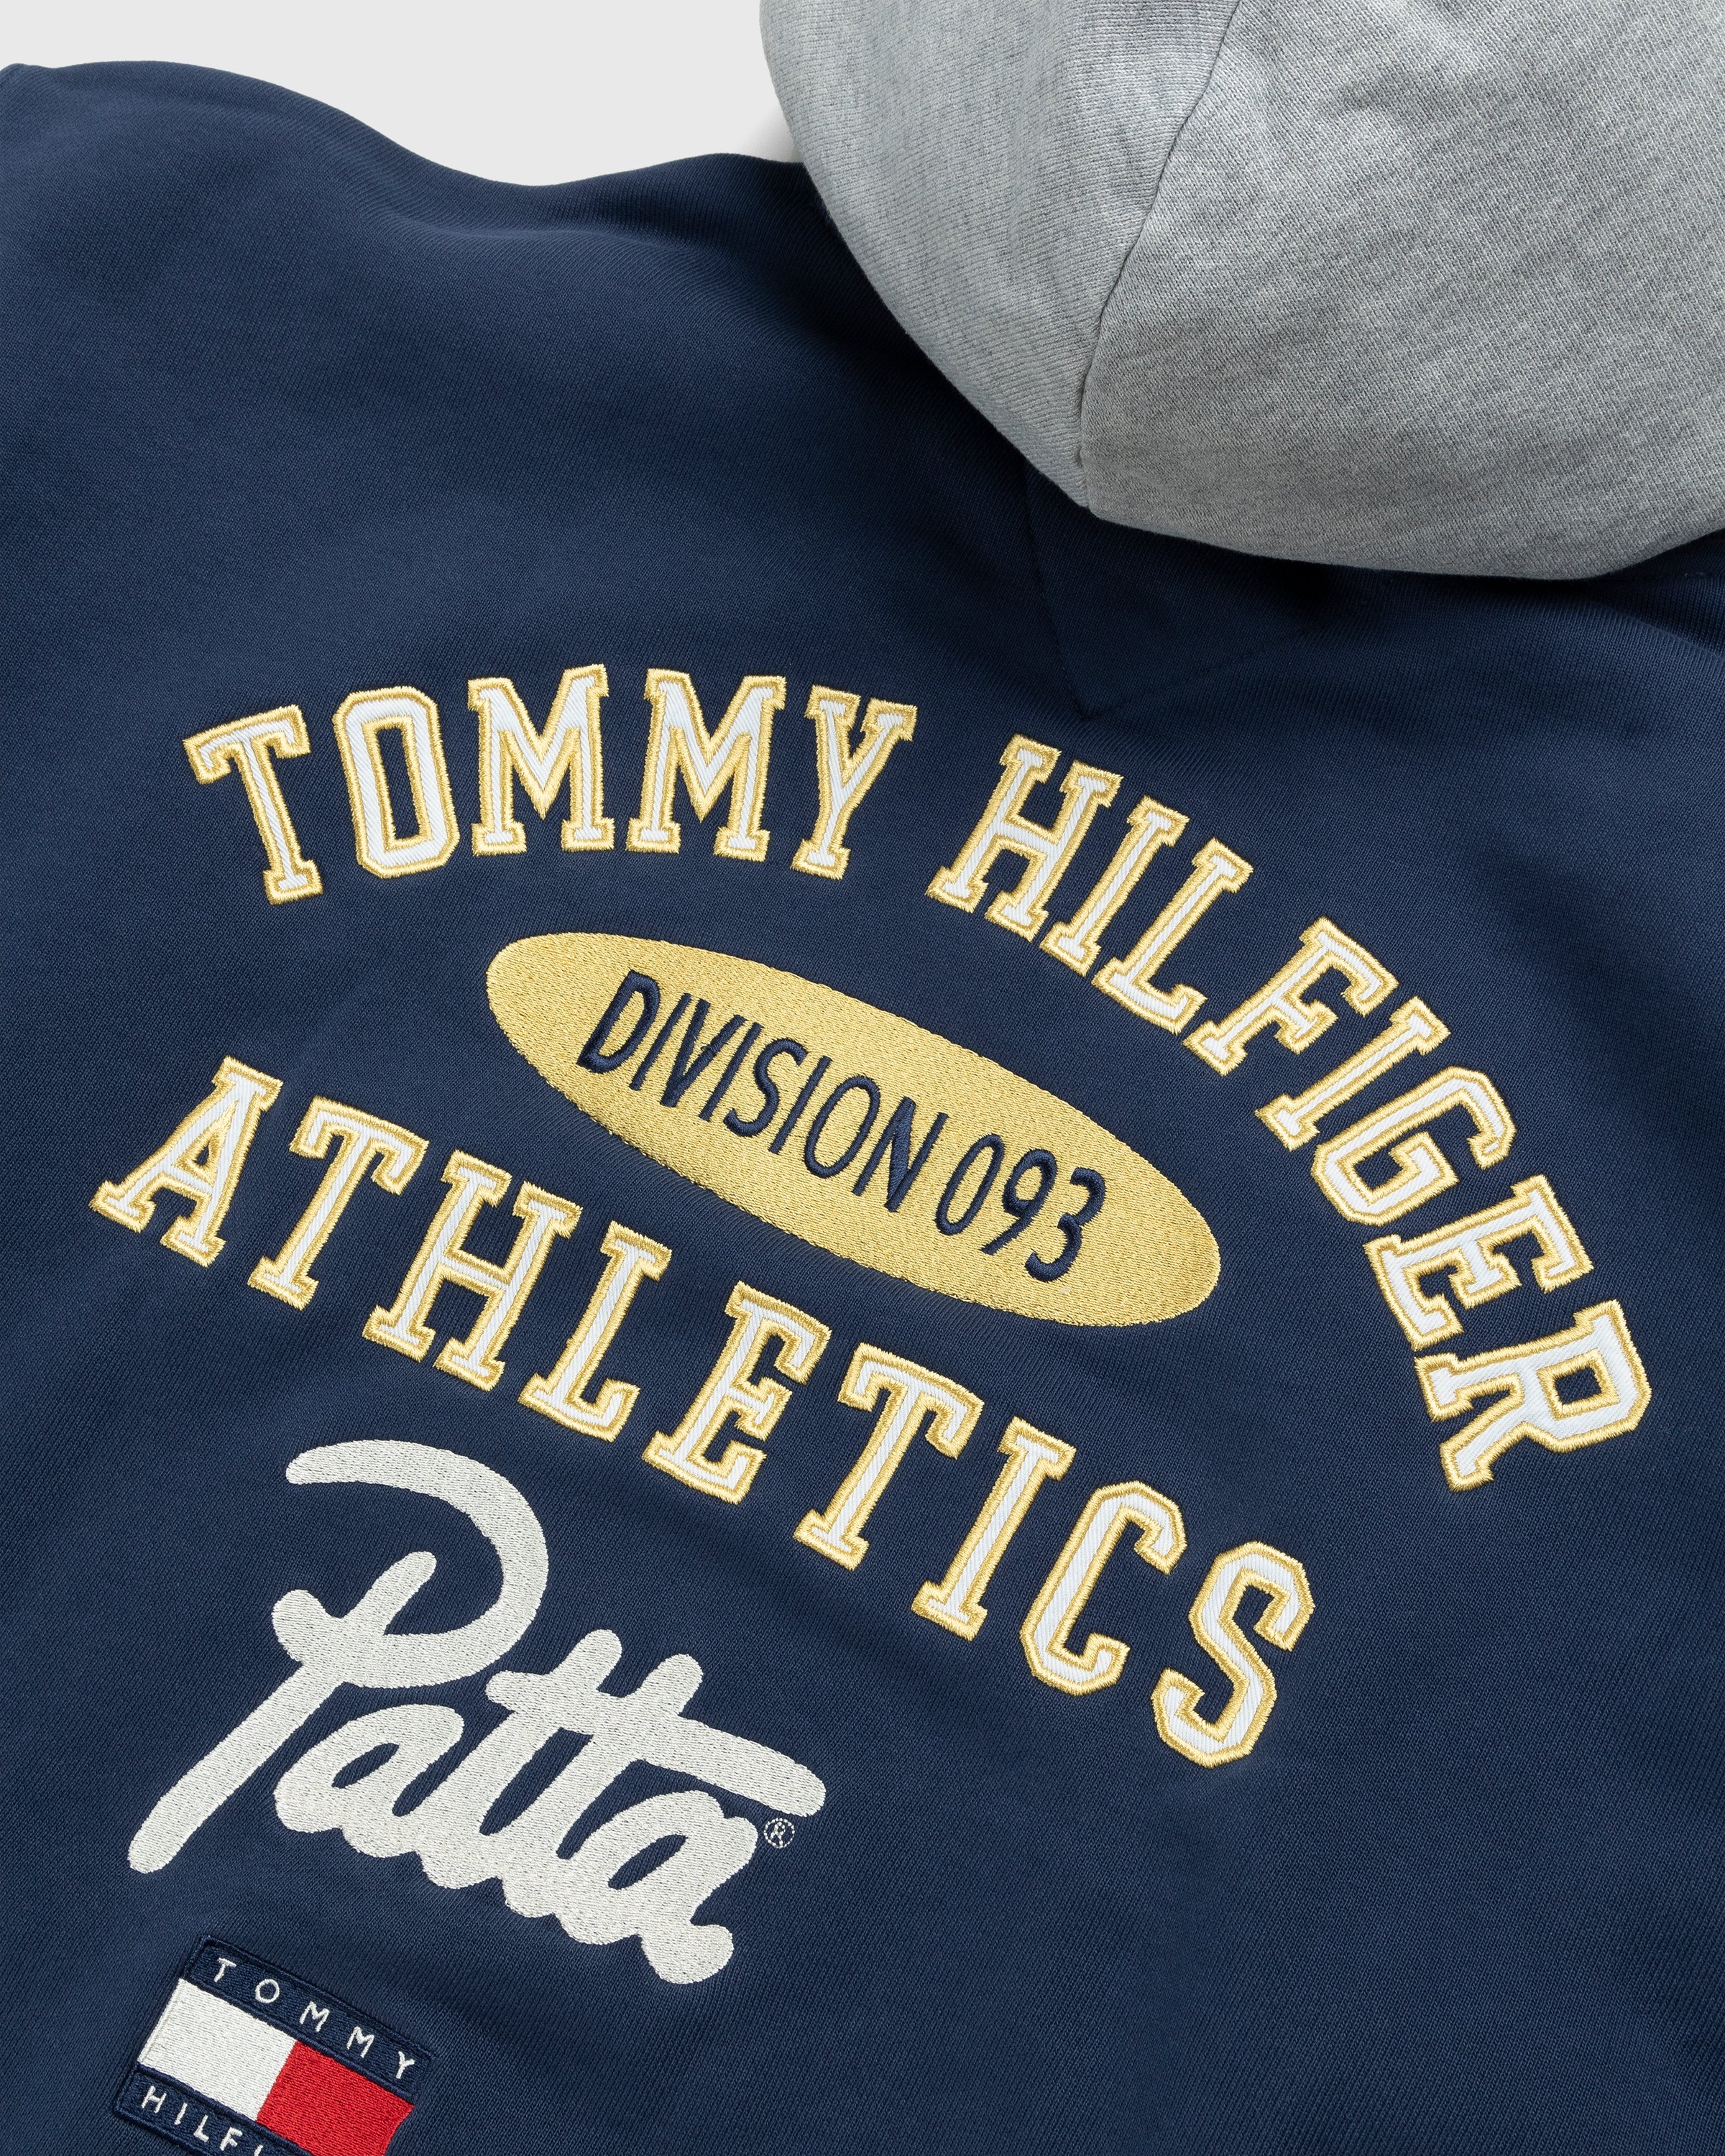 Patta x Tommy Hilfiger - Hoodie Sport Navy - Clothing - Blue - Image 3